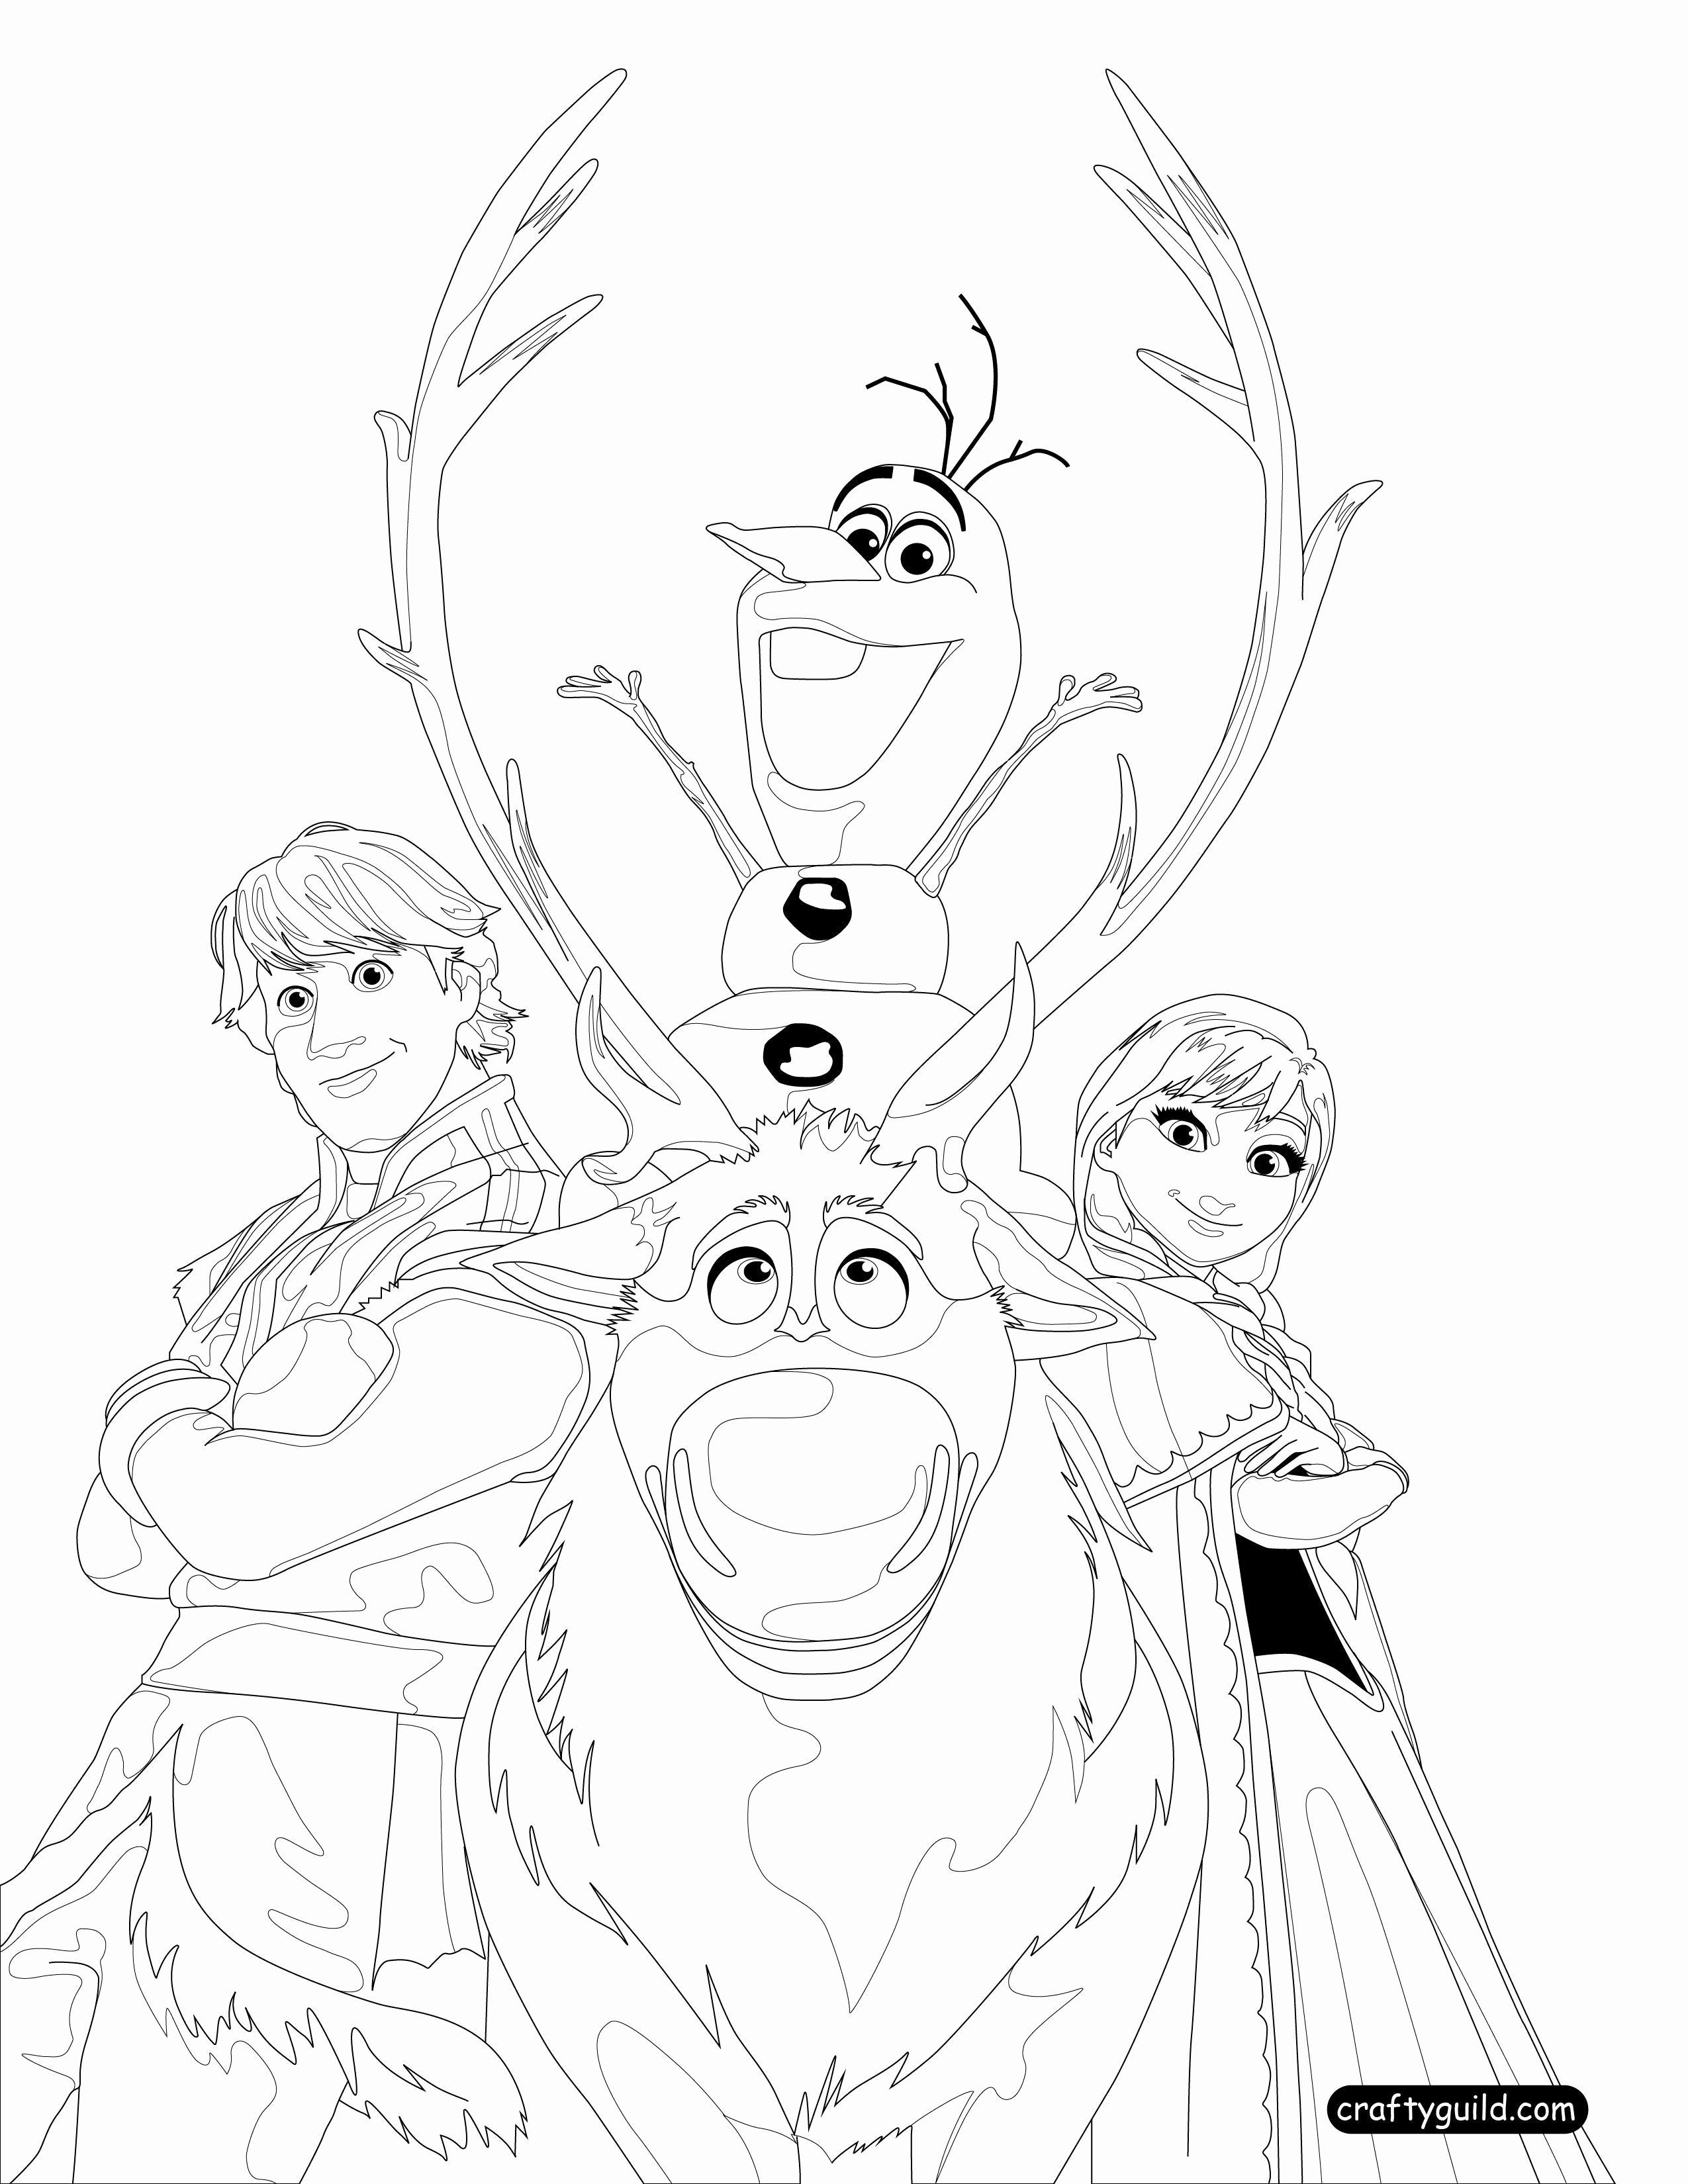 Disney On Ice Coloring Pages in 2020 | Frozen coloring pages, Coloring pages,  Unicorn coloring pages